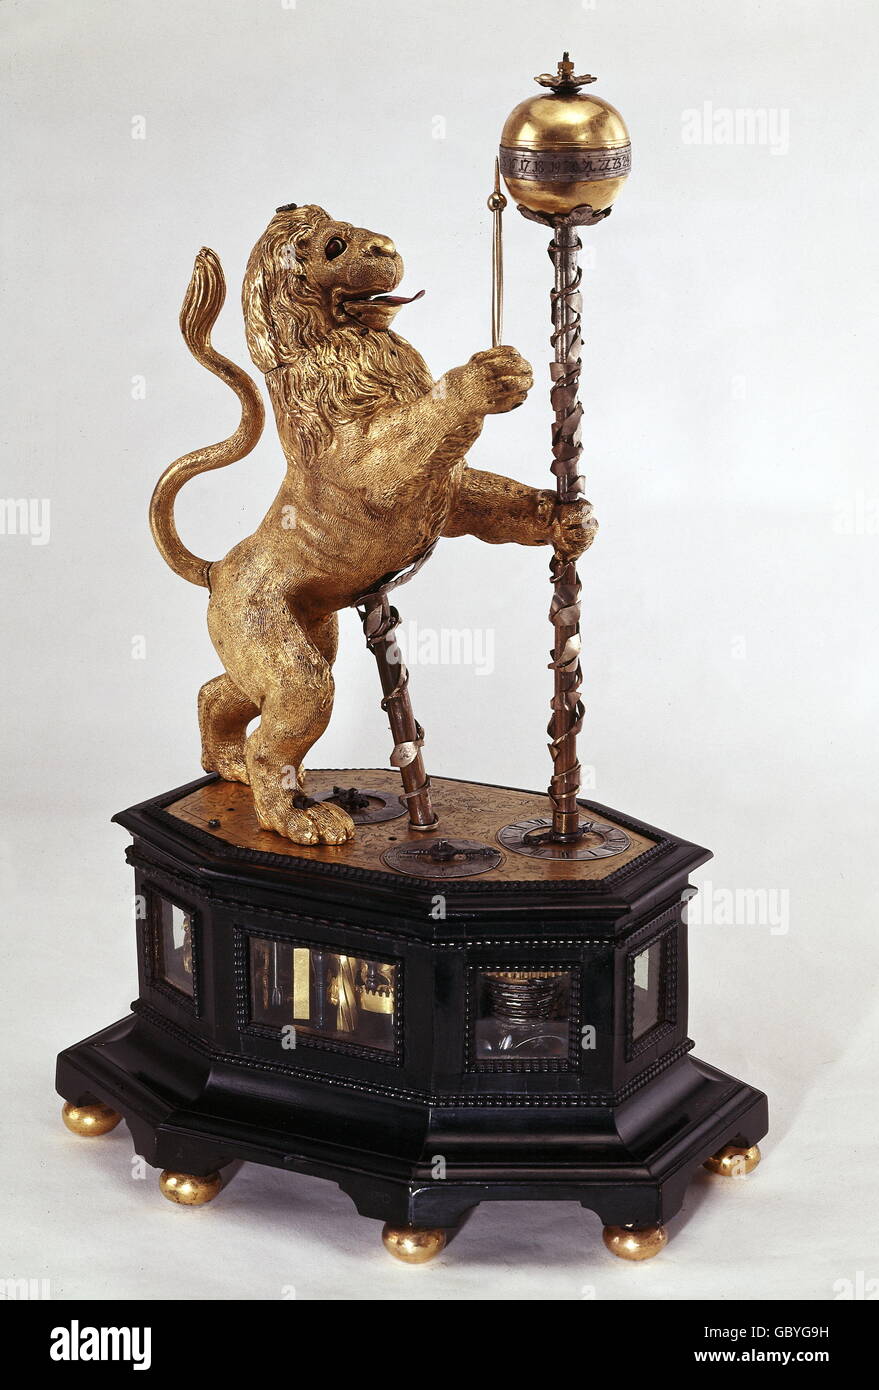 clocks, figure clock of a lion, by Philipp Trump Crailsheim, bronze, gold-plated, circa 1620, Additional-Rights-Clearences-Not Available Stock Photo